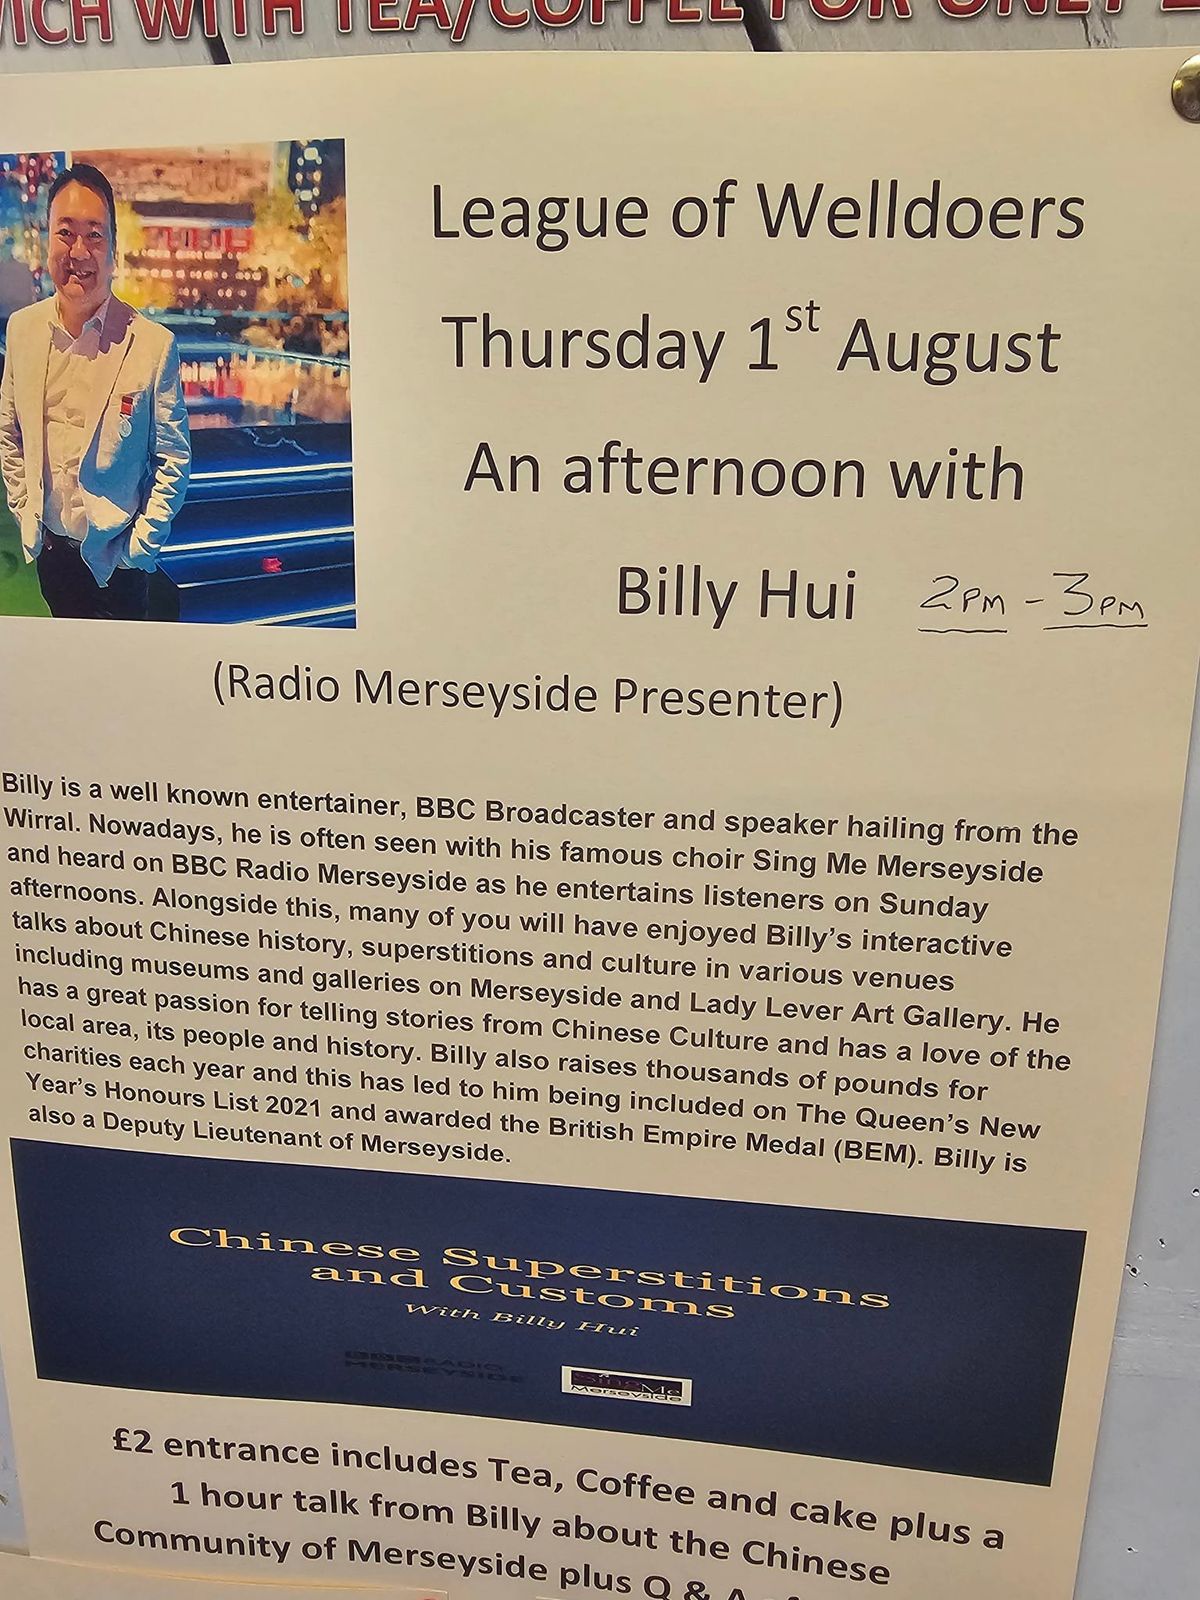 An afternoon with Billy Hui